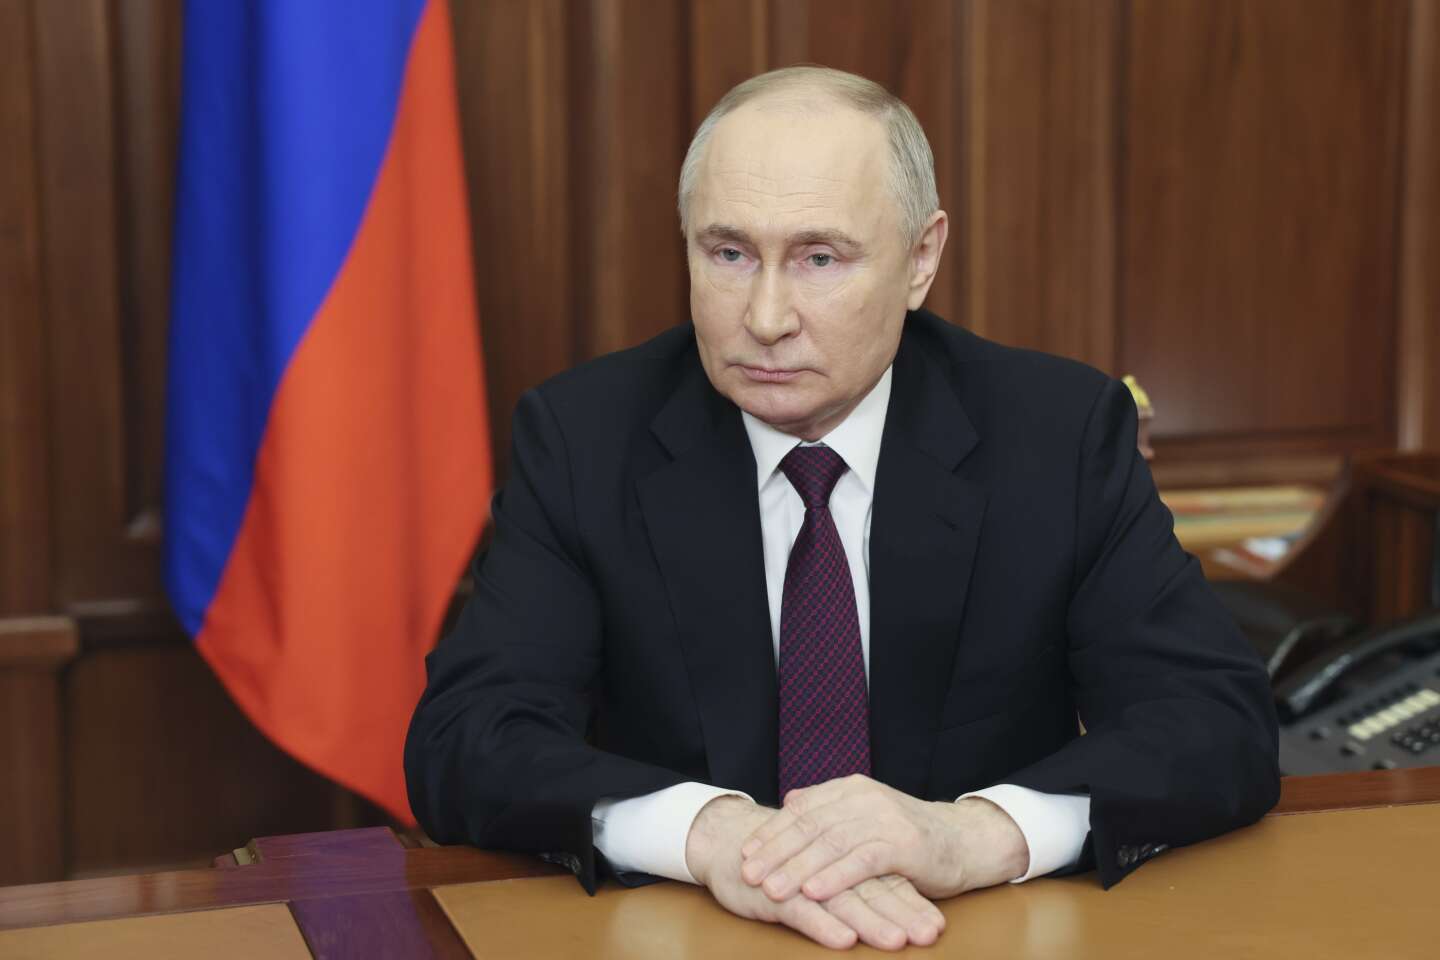 Russia formalized Vladimir Putin's victory and denies any election fraud